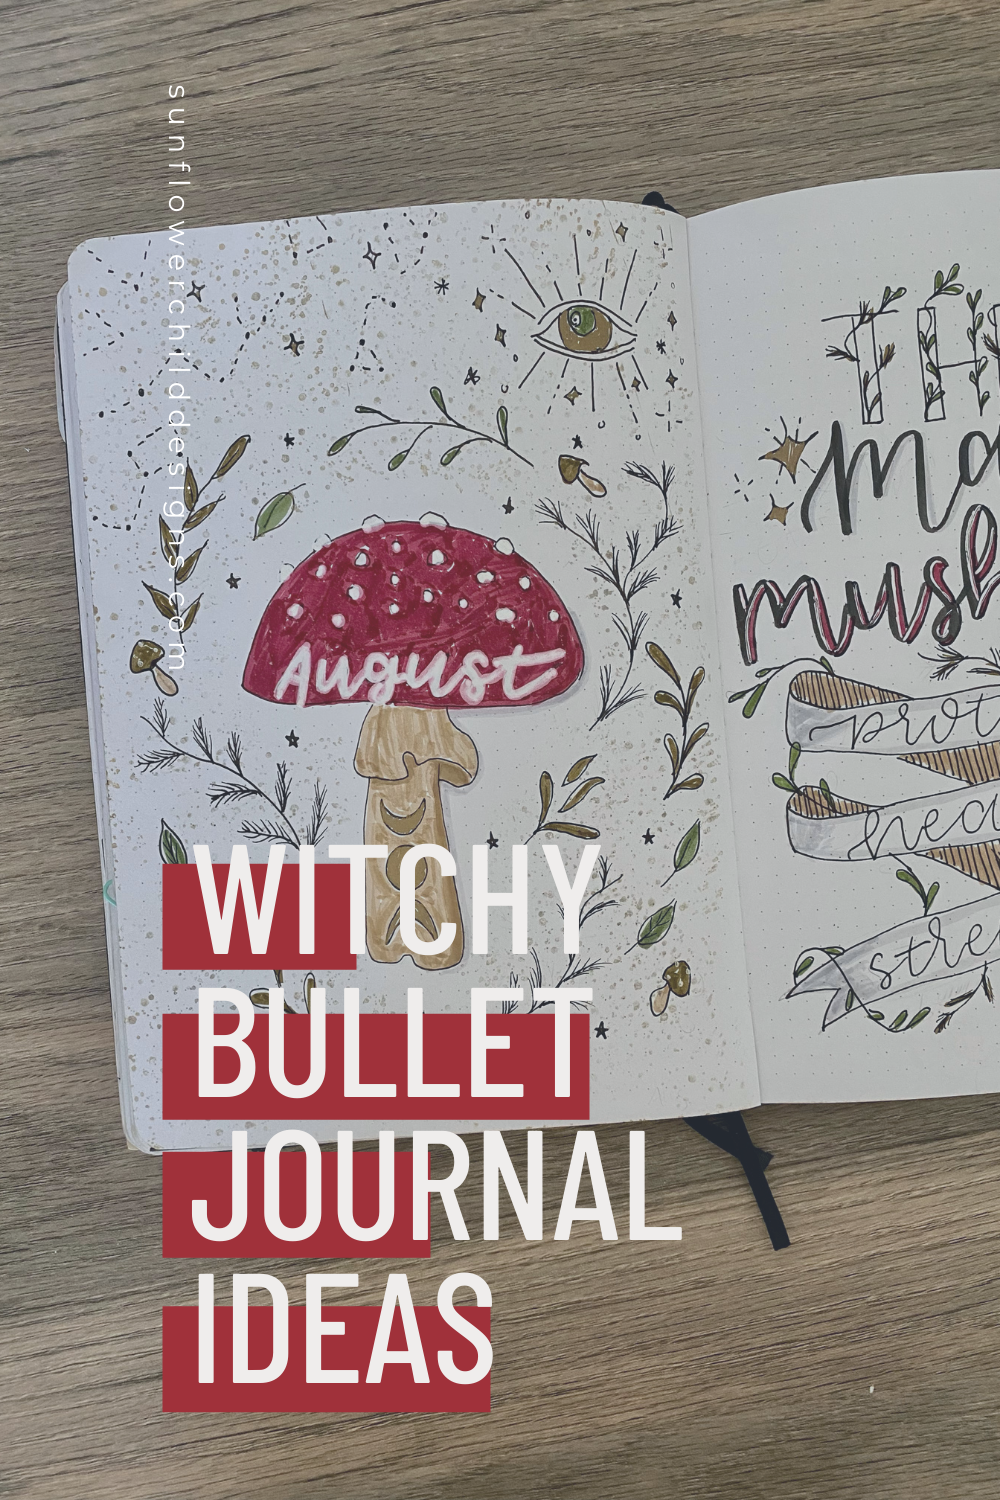 witchy-bullet-journal-ideas-august-bullet-journal-ideas 5.png